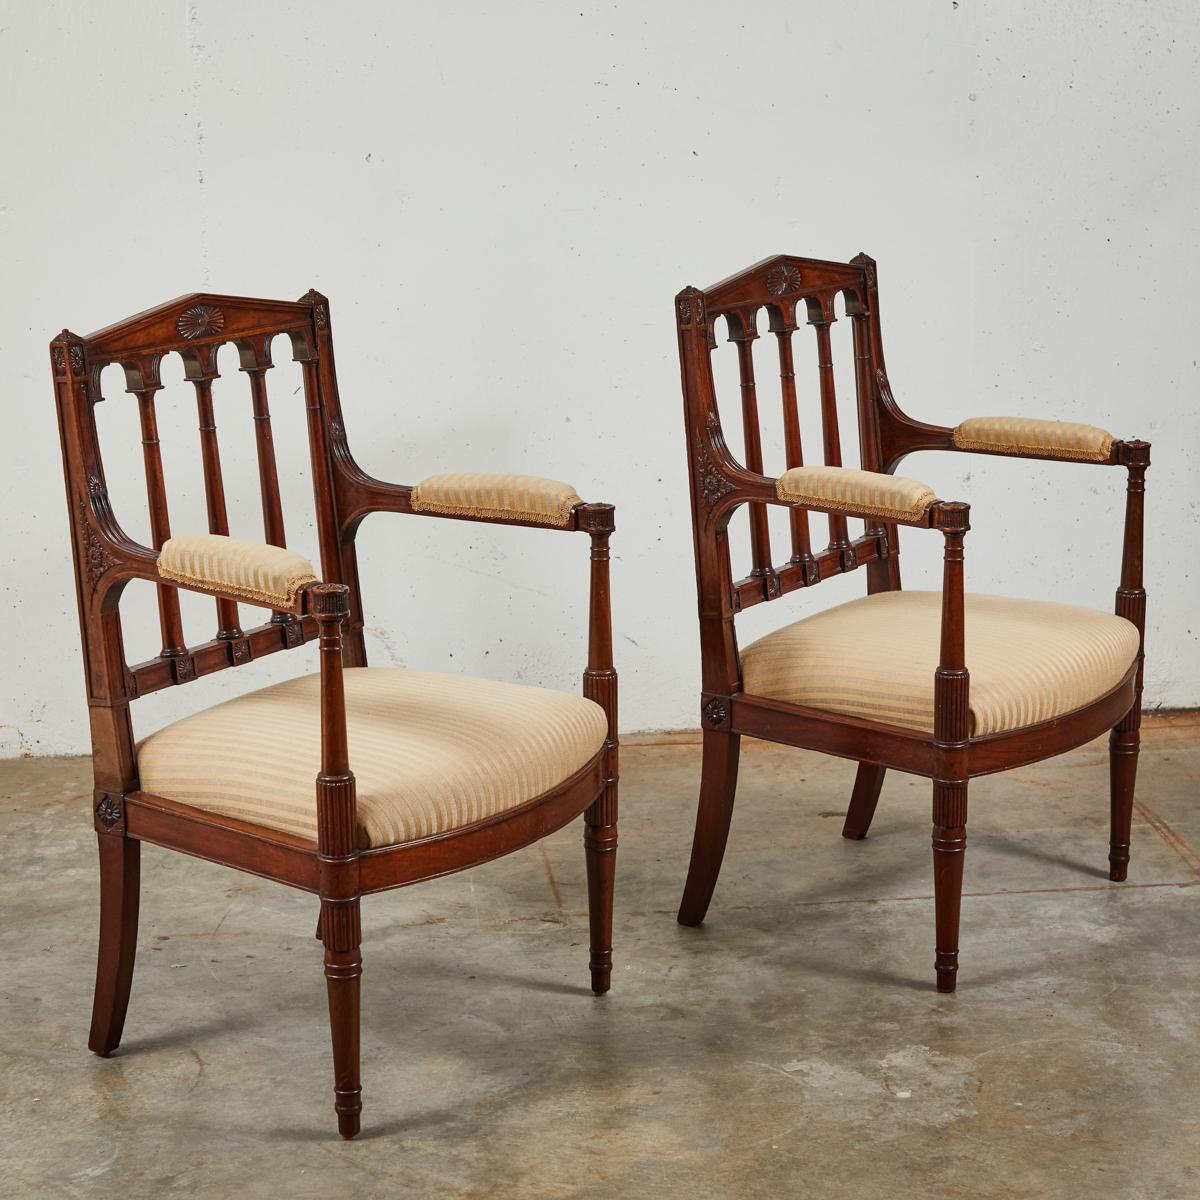 Pair of Louis XVI style hand-carved mahogany fauteuils by George Jacob, a distinguished designer under the reign of Napoleon I. Newly reupholstered in a creamy gold-toned fabric, the chairs have a unique architectural schema to their decorative